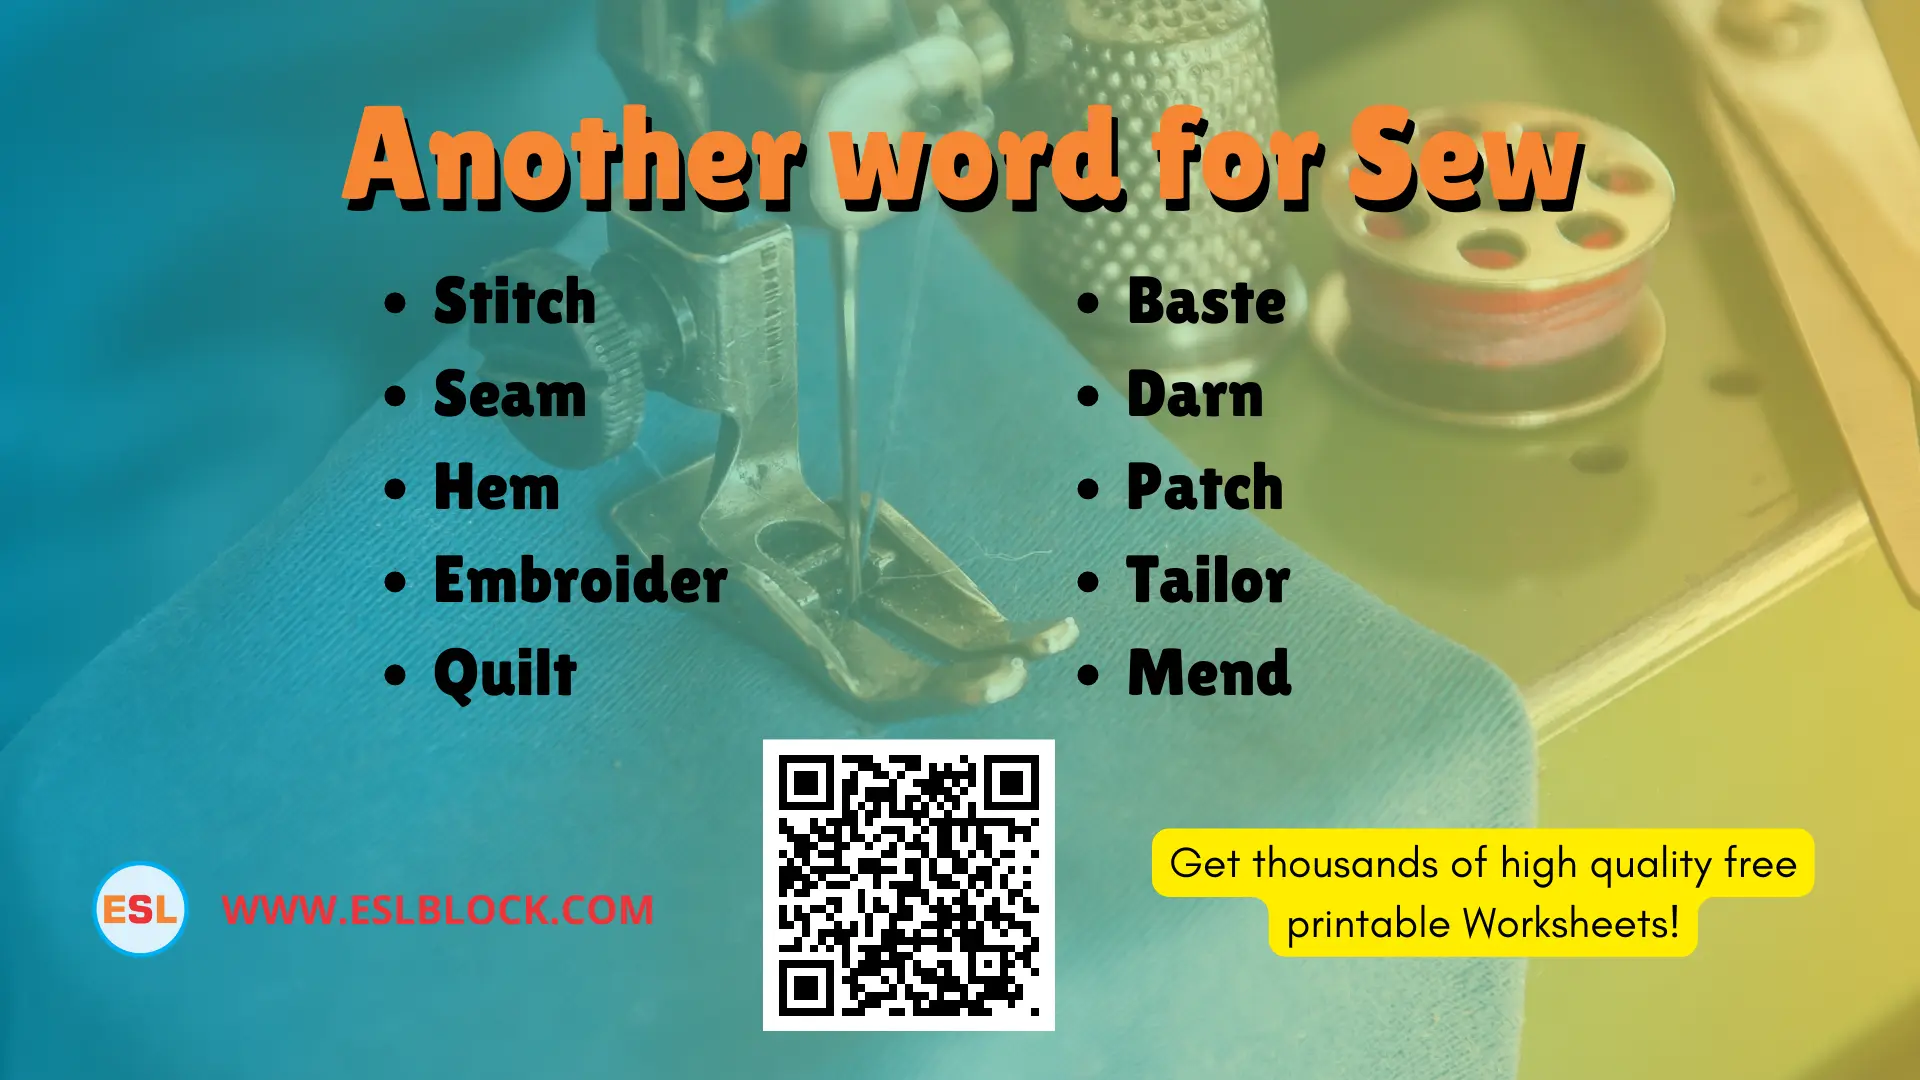 What is another word for Sew